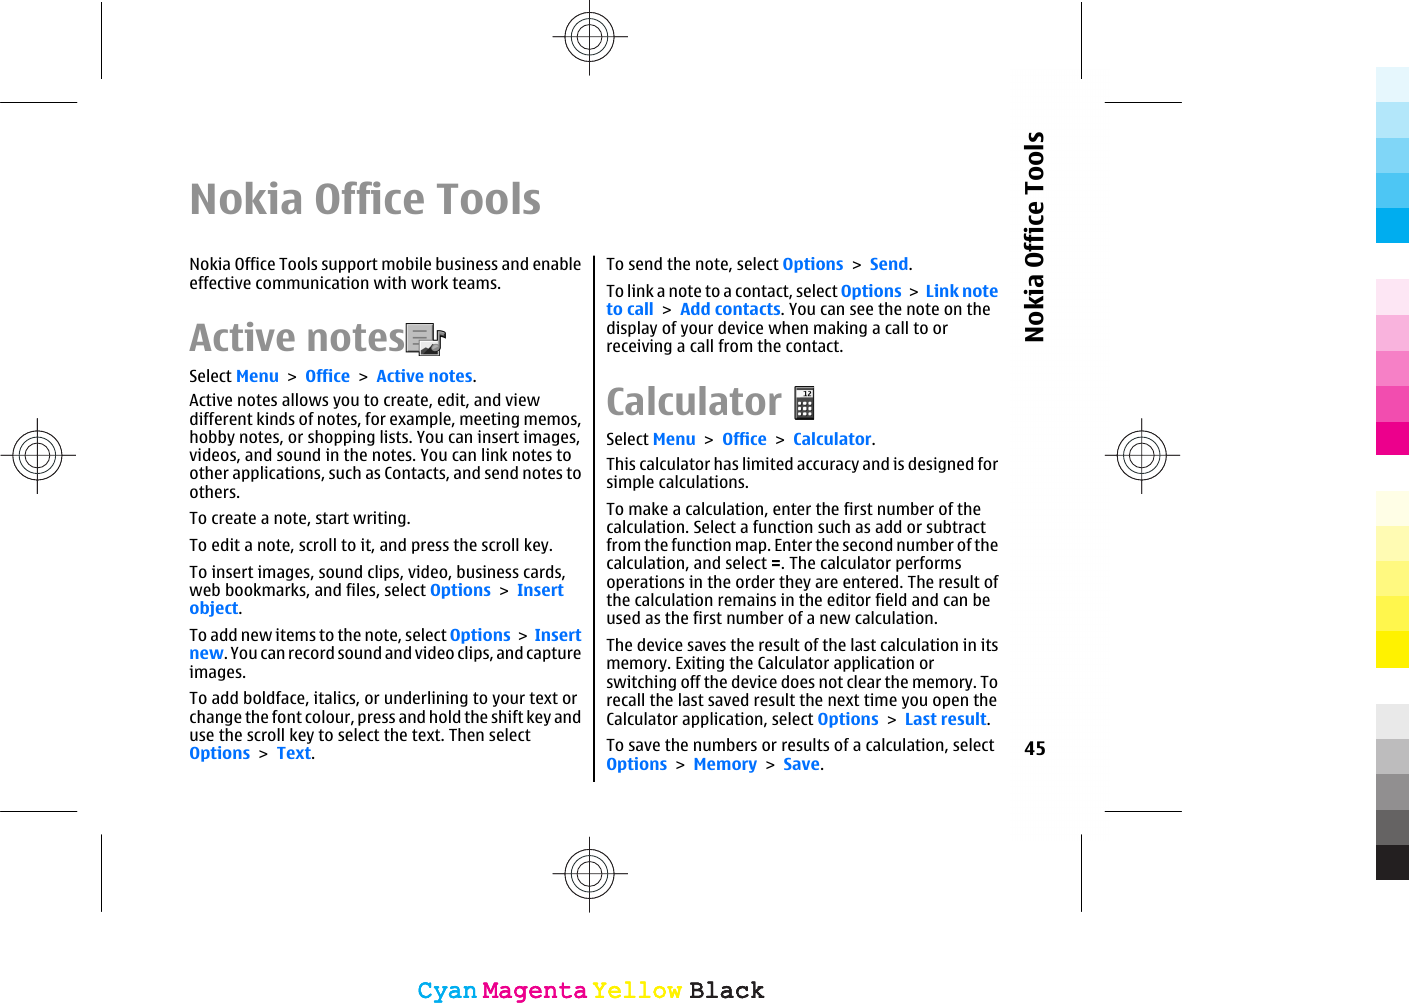 Nokia Office ToolsNokia Office Tools support mobile business and enableeffective communication with work teams.Active notes  Select Menu &gt; Office &gt; Active notes.Active notes allows you to create, edit, and viewdifferent kinds of notes, for example, meeting memos,hobby notes, or shopping lists. You can insert images,videos, and sound in the notes. You can link notes toother applications, such as Contacts, and send notes toothers.To create a note, start writing.To edit a note, scroll to it, and press the scroll key.To insert images, sound clips, video, business cards,web bookmarks, and files, select Options &gt; Insertobject.To add new items to the note, select Options &gt; Insertnew. You can record sound and video clips, and captureimages.To add boldface, italics, or underlining to your text orchange the font colour, press and hold the shift key anduse the scroll key to select the text. Then selectOptions &gt; Text.To send the note, select Options &gt; Send.To link a note to a contact, select Options &gt; Link noteto call &gt; Add contacts. You can see the note on thedisplay of your device when making a call to orreceiving a call from the contact.CalculatorSelect Menu &gt; Office &gt; Calculator.This calculator has limited accuracy and is designed forsimple calculations.To make a calculation, enter the first number of thecalculation. Select a function such as add or subtractfrom the function map. Enter the second number of thecalculation, and select =. The calculator performsoperations in the order they are entered. The result ofthe calculation remains in the editor field and can beused as the first number of a new calculation.The device saves the result of the last calculation in itsmemory. Exiting the Calculator application orswitching off the device does not clear the memory. Torecall the last saved result the next time you open theCalculator application, select Options &gt; Last result.To save the numbers or results of a calculation, selectOptions &gt; Memory &gt; Save.45Nokia Office ToolsCyanCyanMagentaMagentaYellowYellowBlackBlackCyanCyanMagentaMagentaYellowYellowBlackBlack